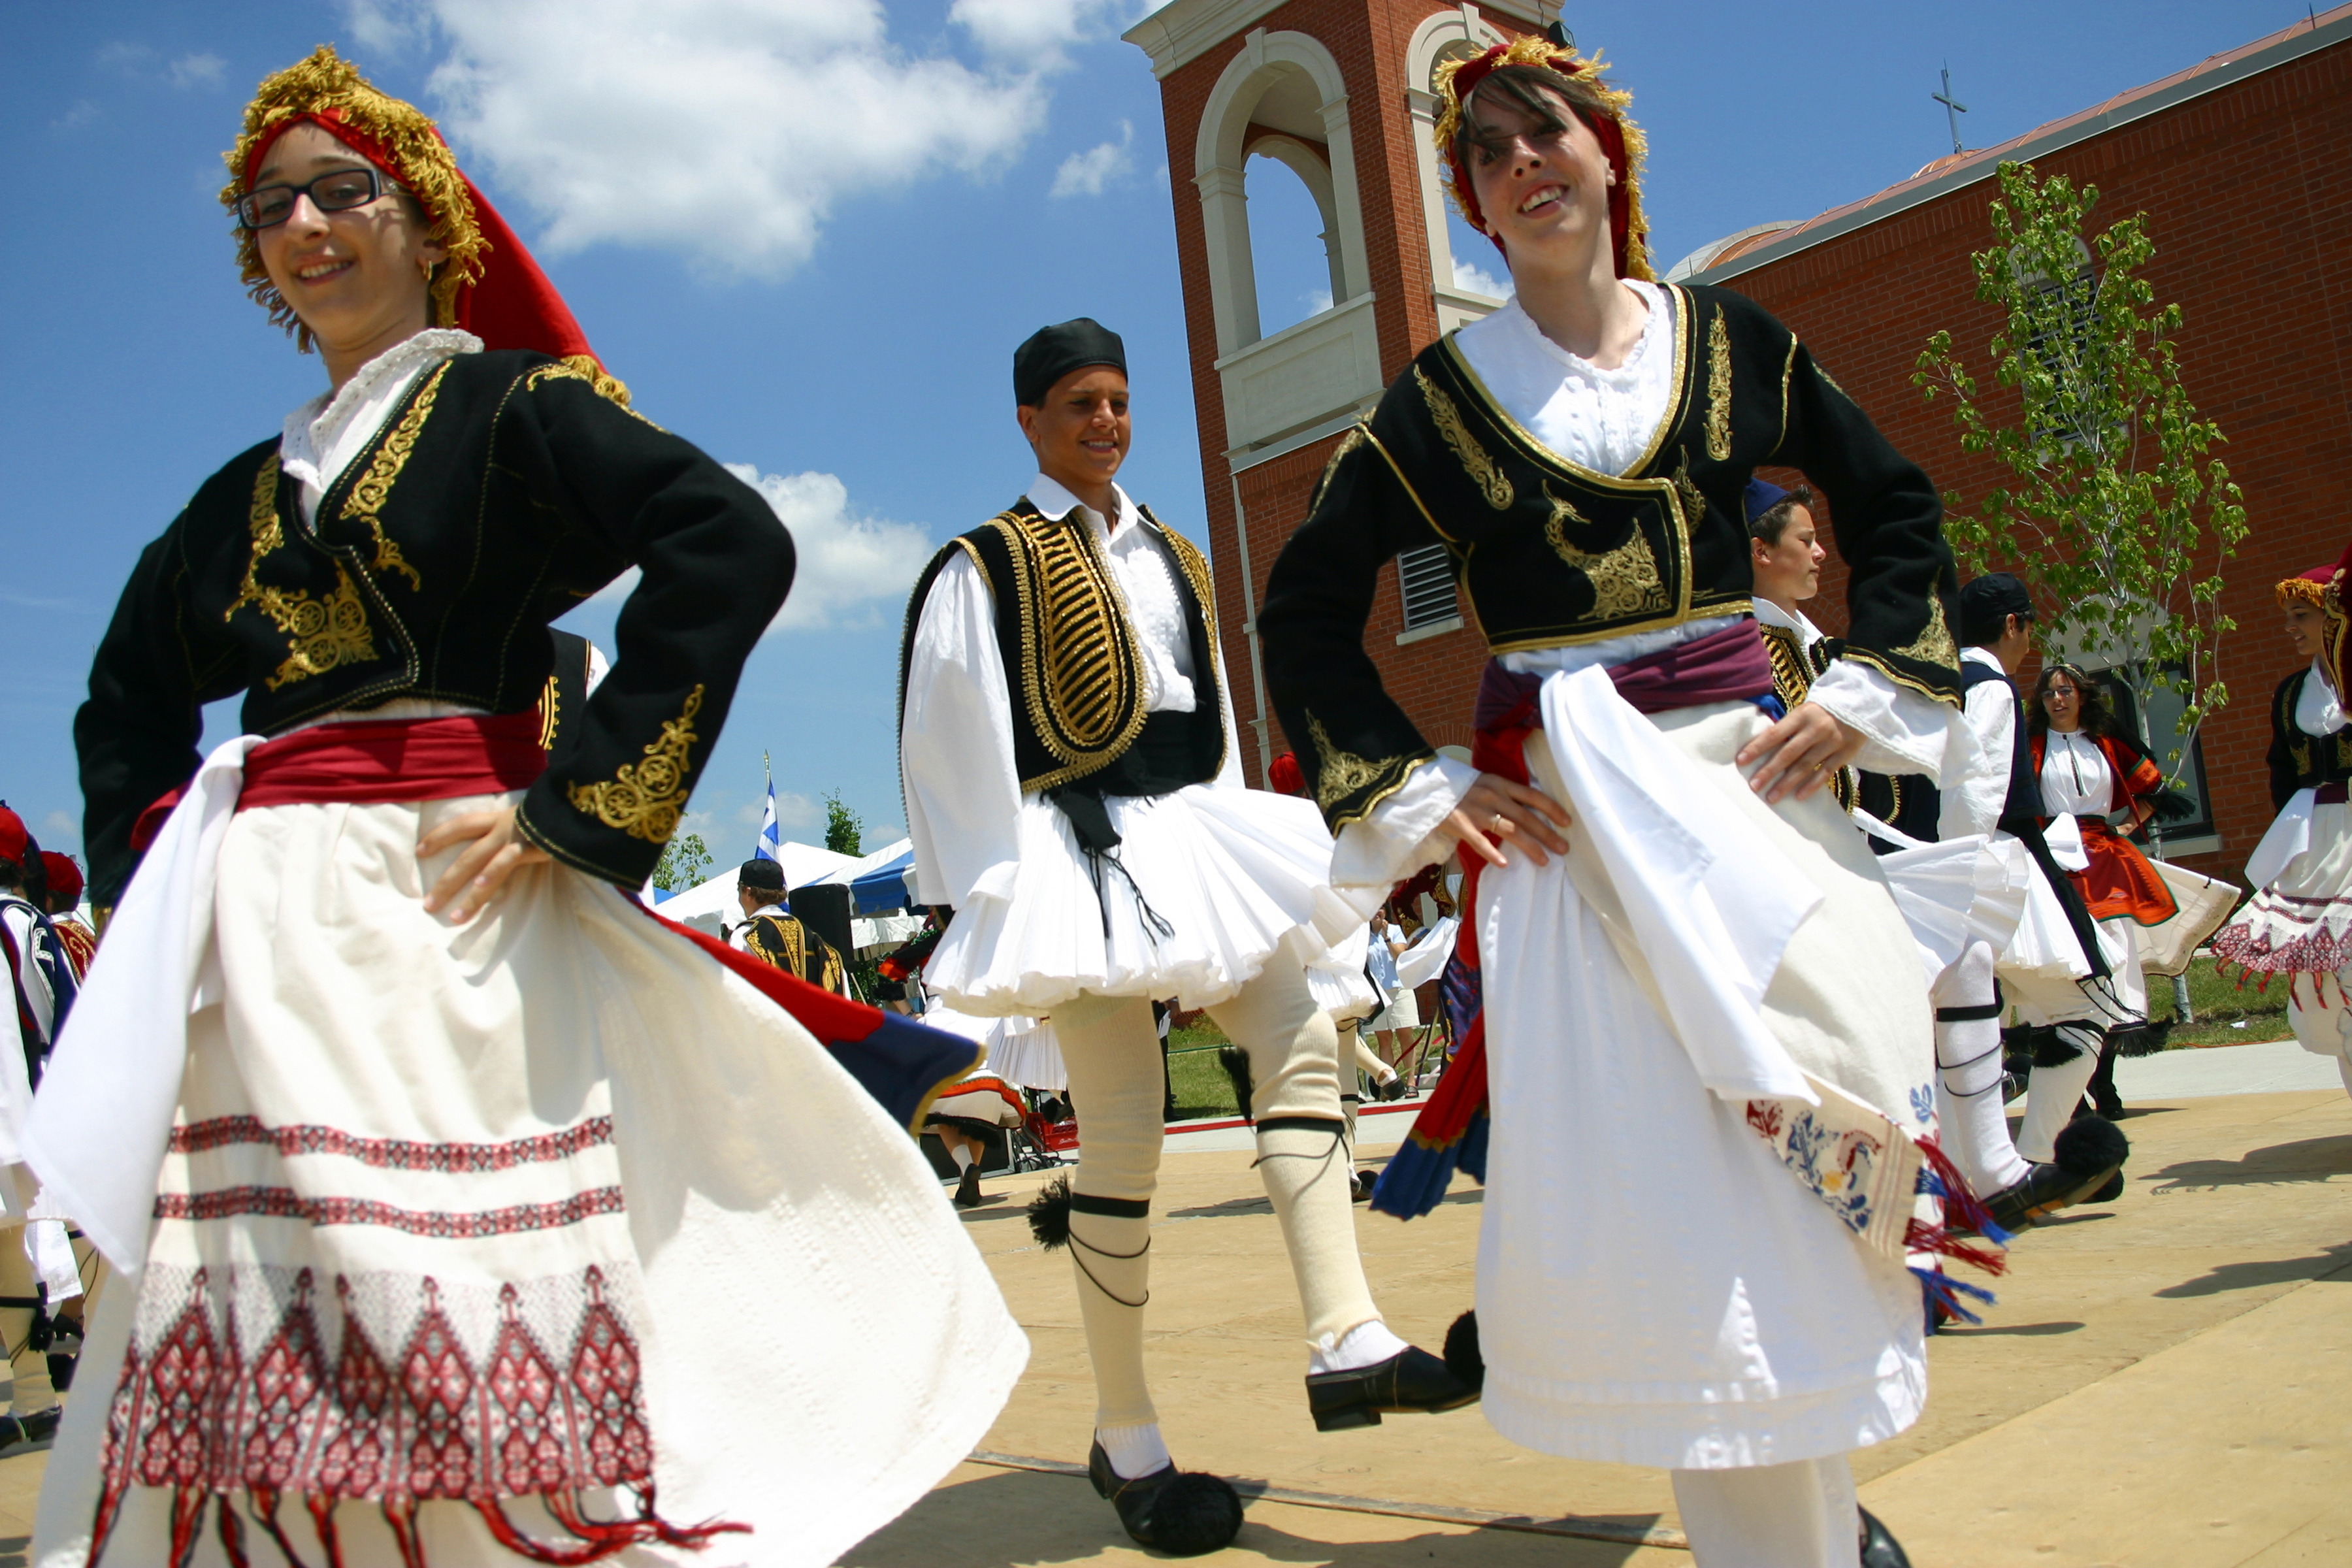 greek culture and traditions